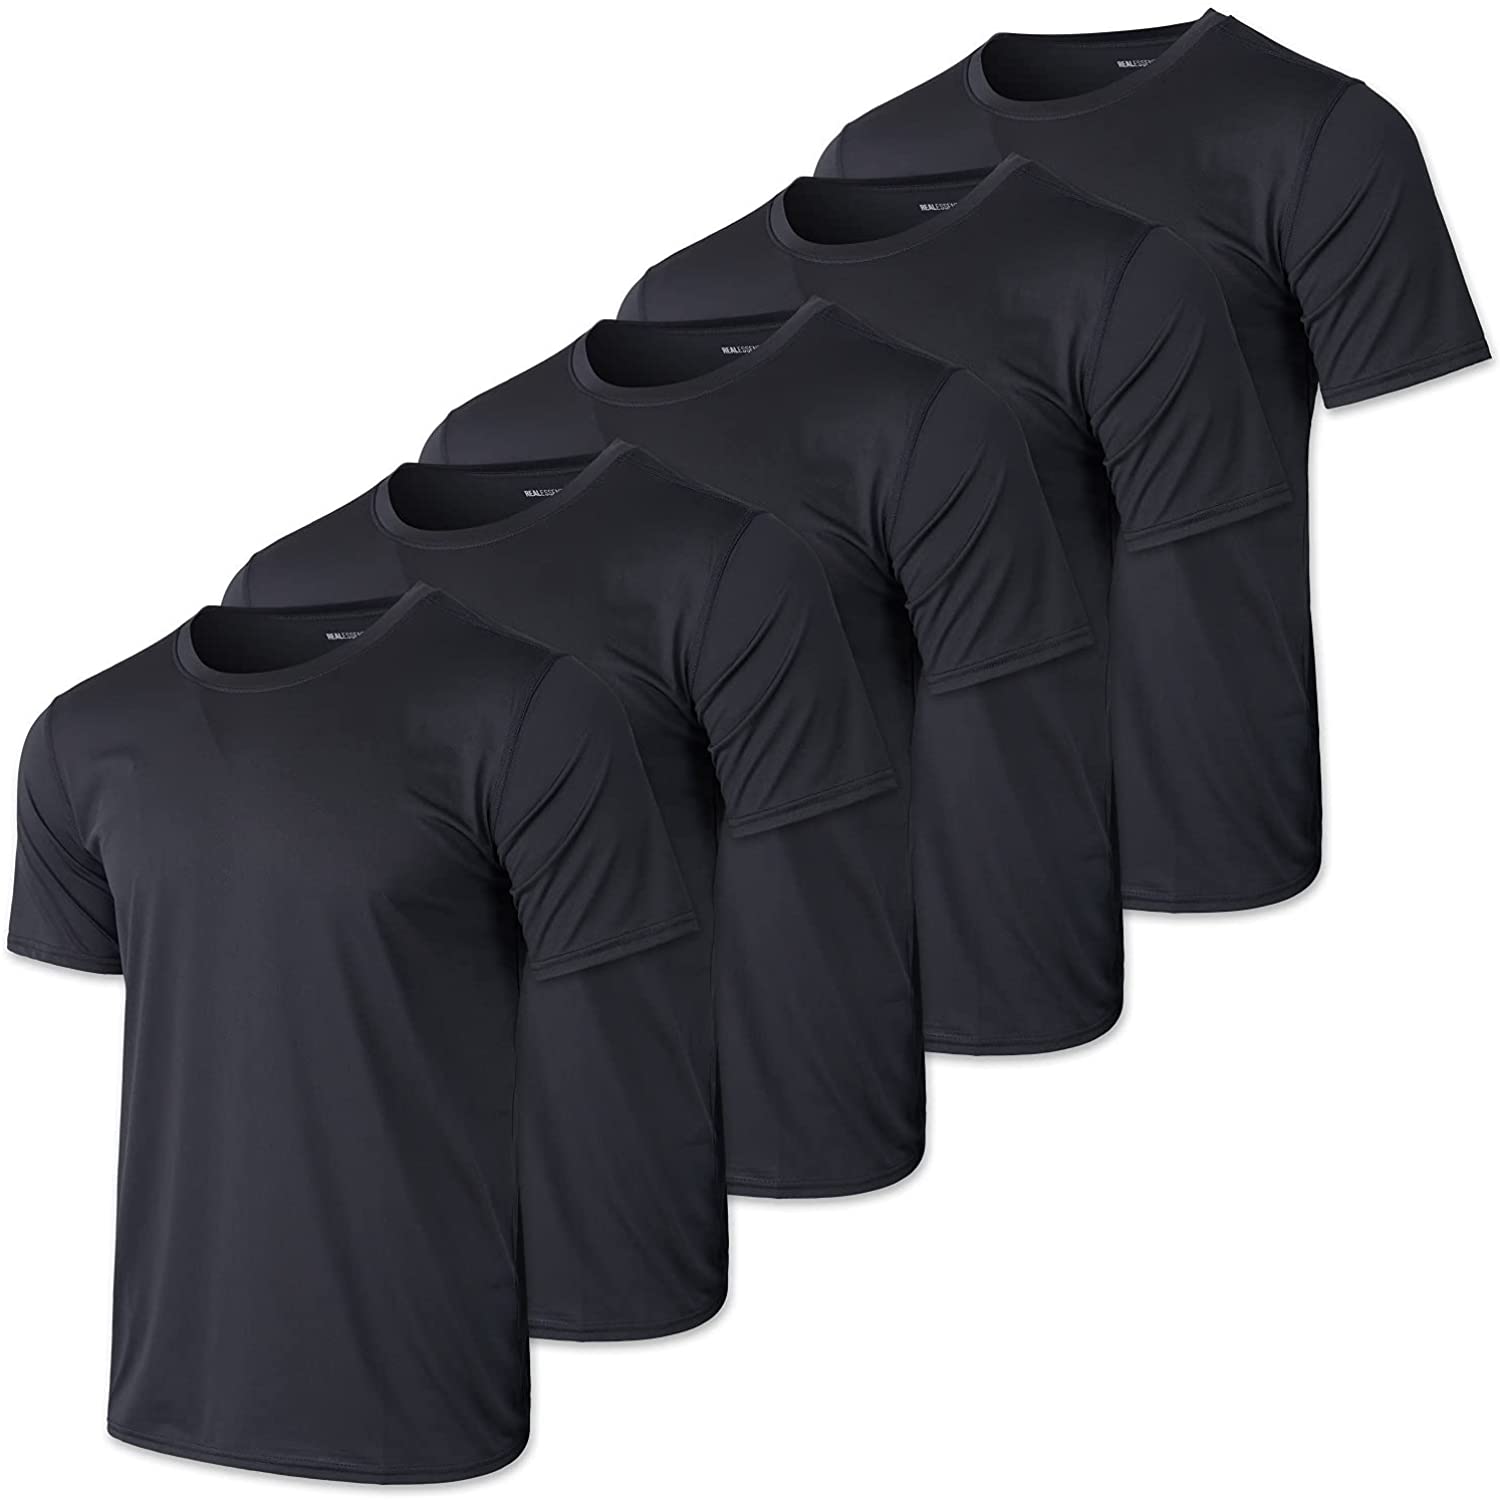 5 Pack: Men’s Dry-Fit Moisture Wicking Active Athletic Performance Crew  T-Shirt